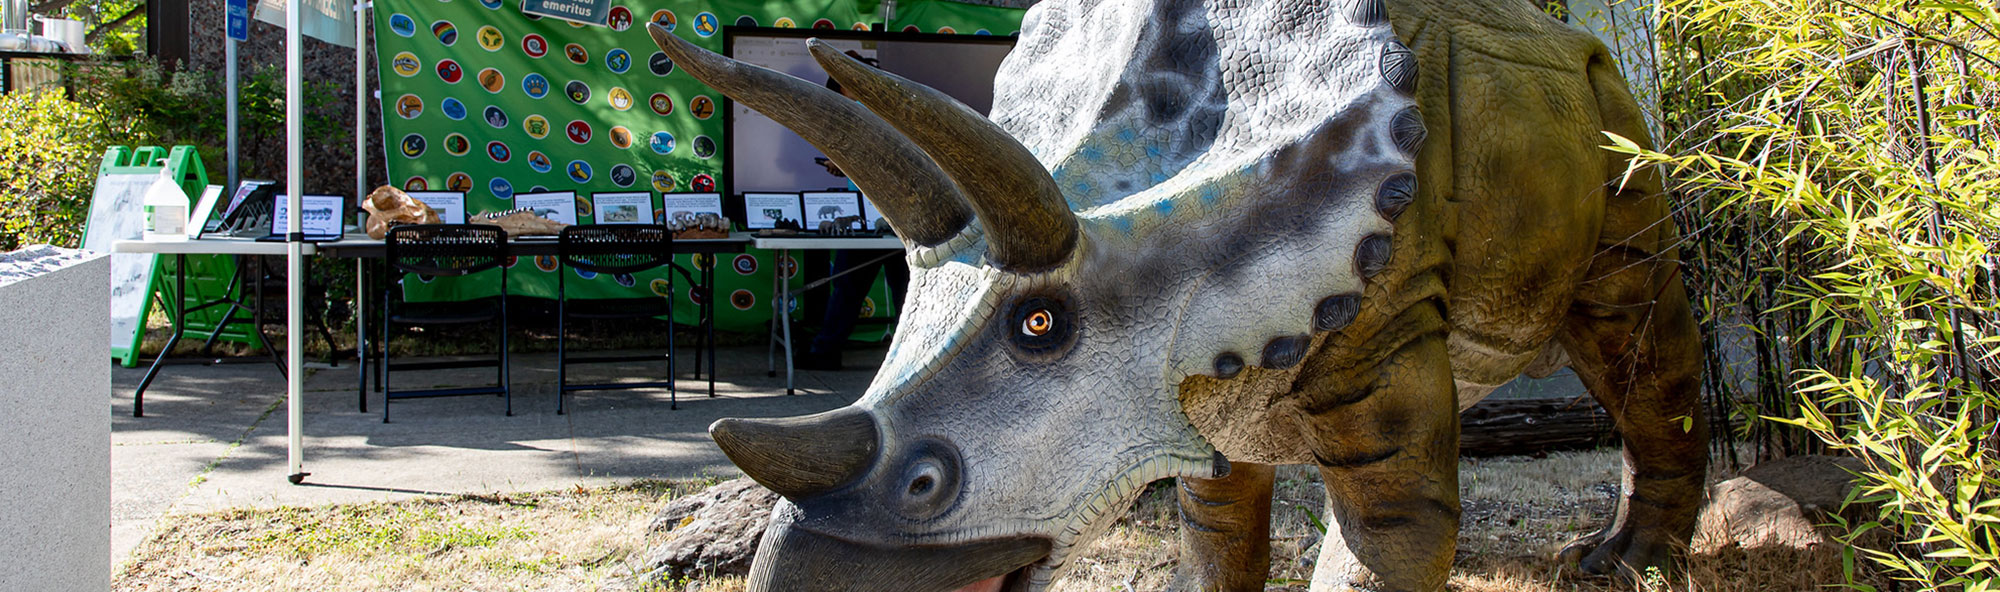 Triceratops in front of tent for Dino day 2022.